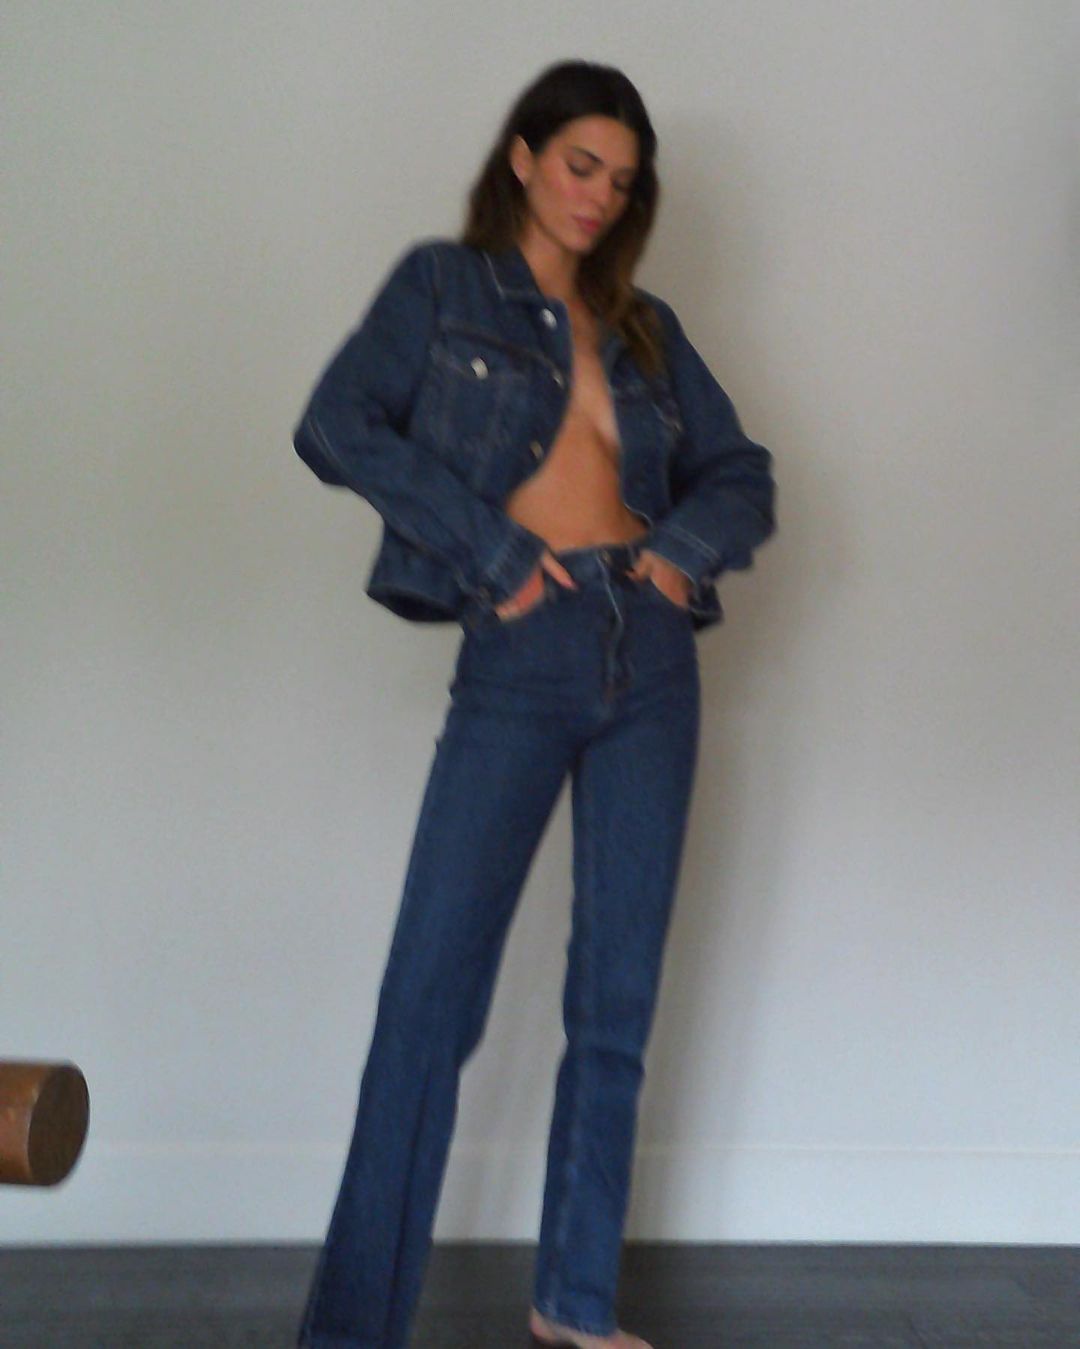 arlene tocmo recommends topless in denim pic